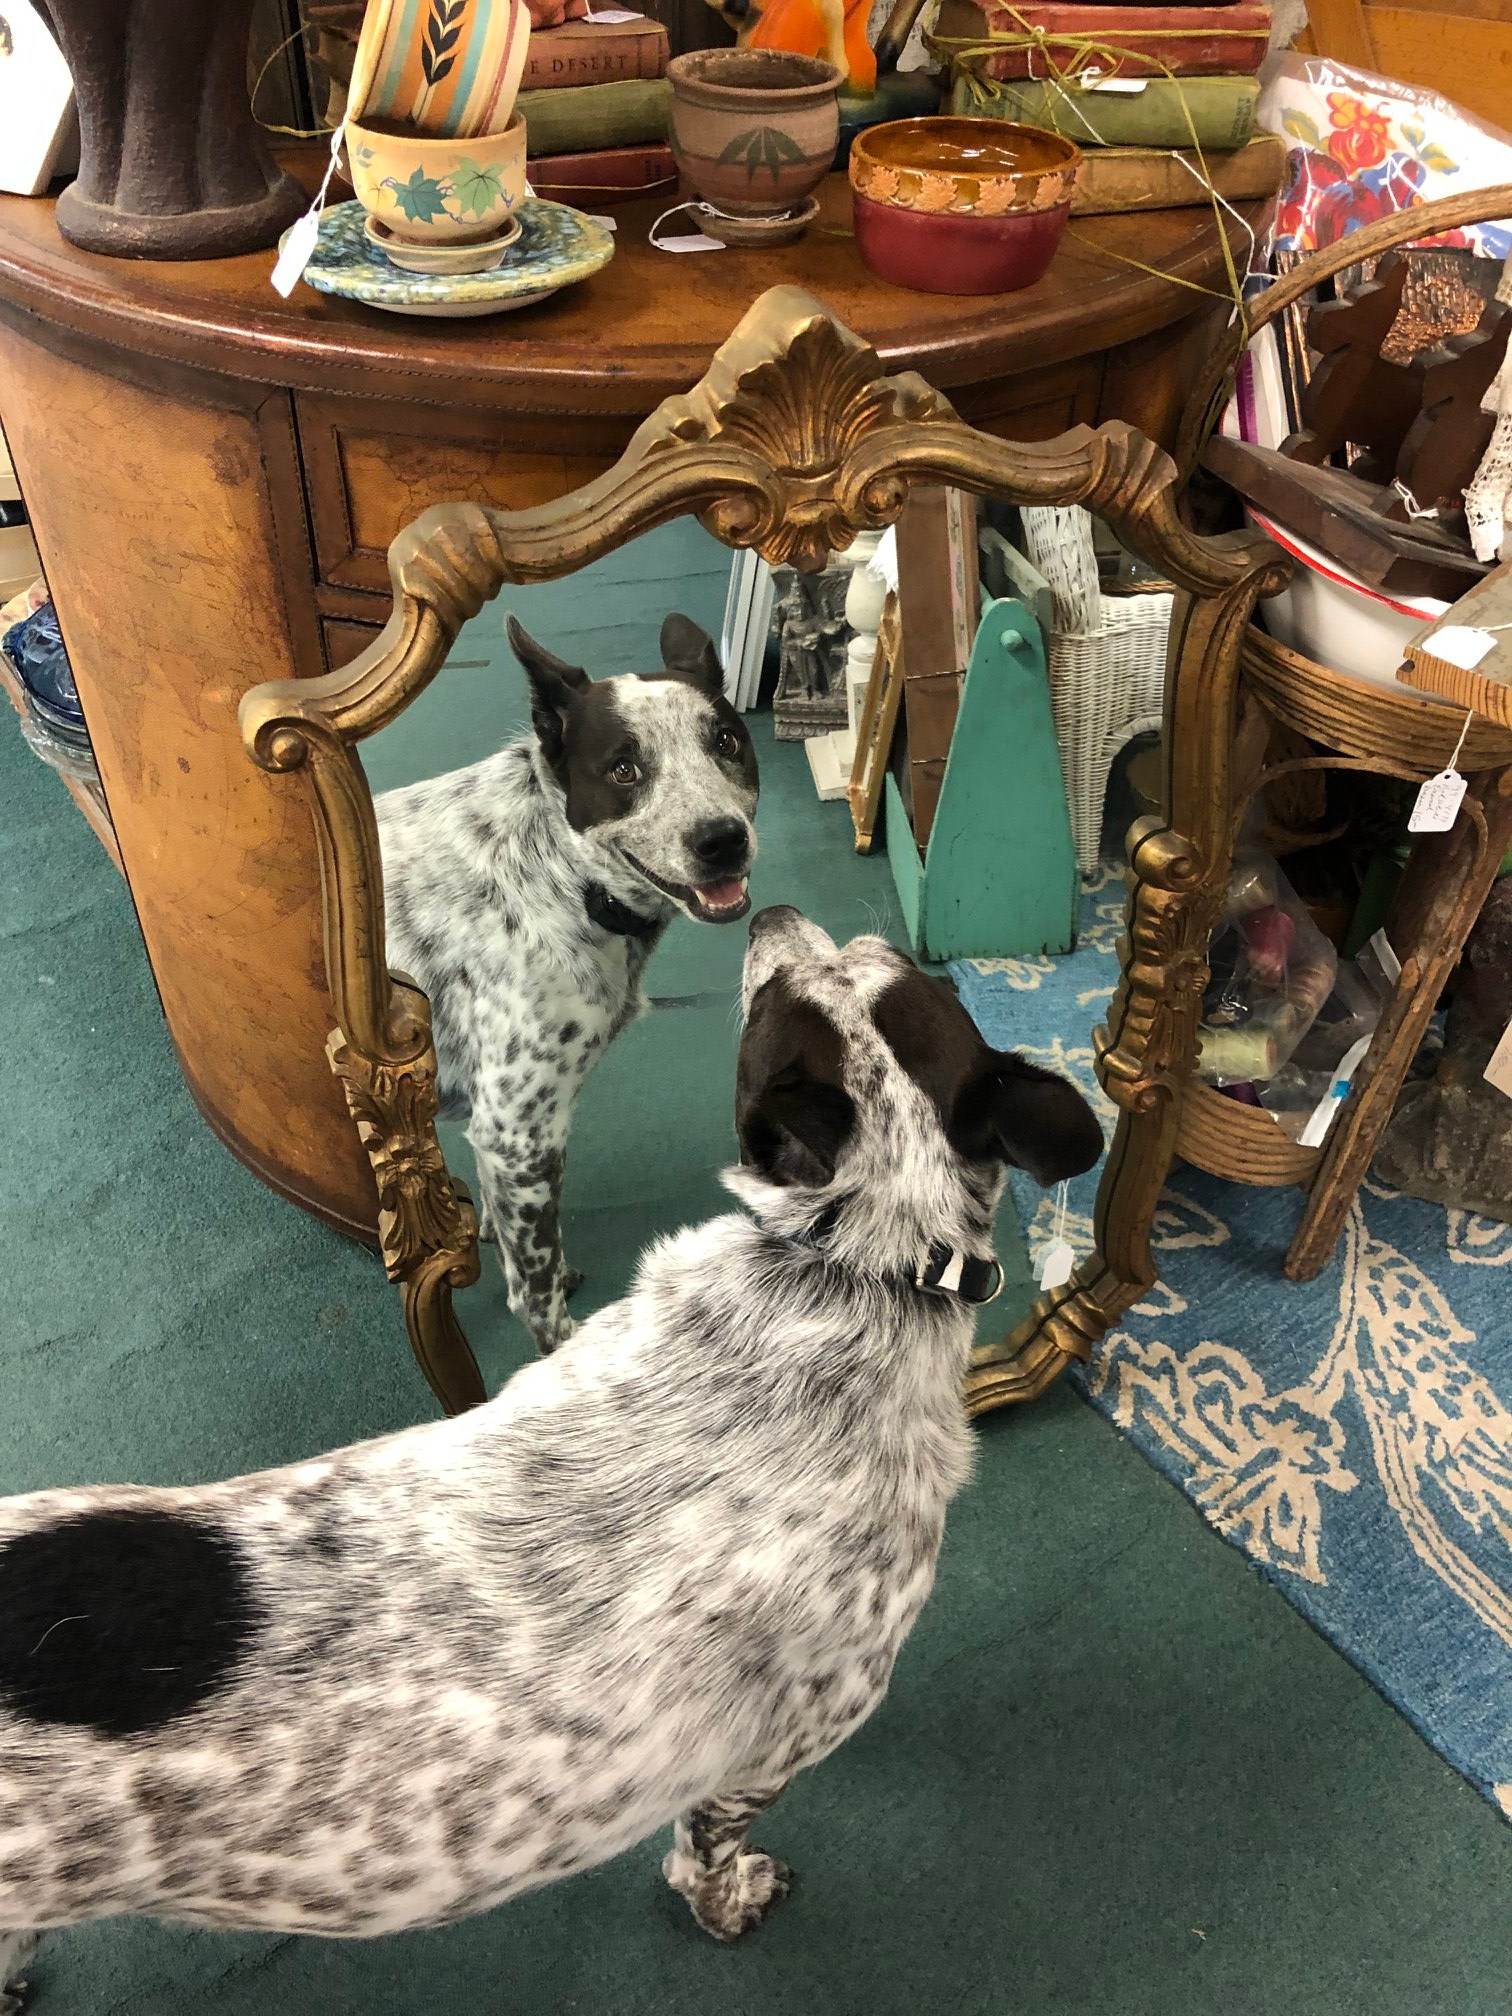 Scranberry Snapshot - Did you see that beautiful dog in the mirror? - Scranberry Coop - Vintage Store - Antiques, Collectibles, & More